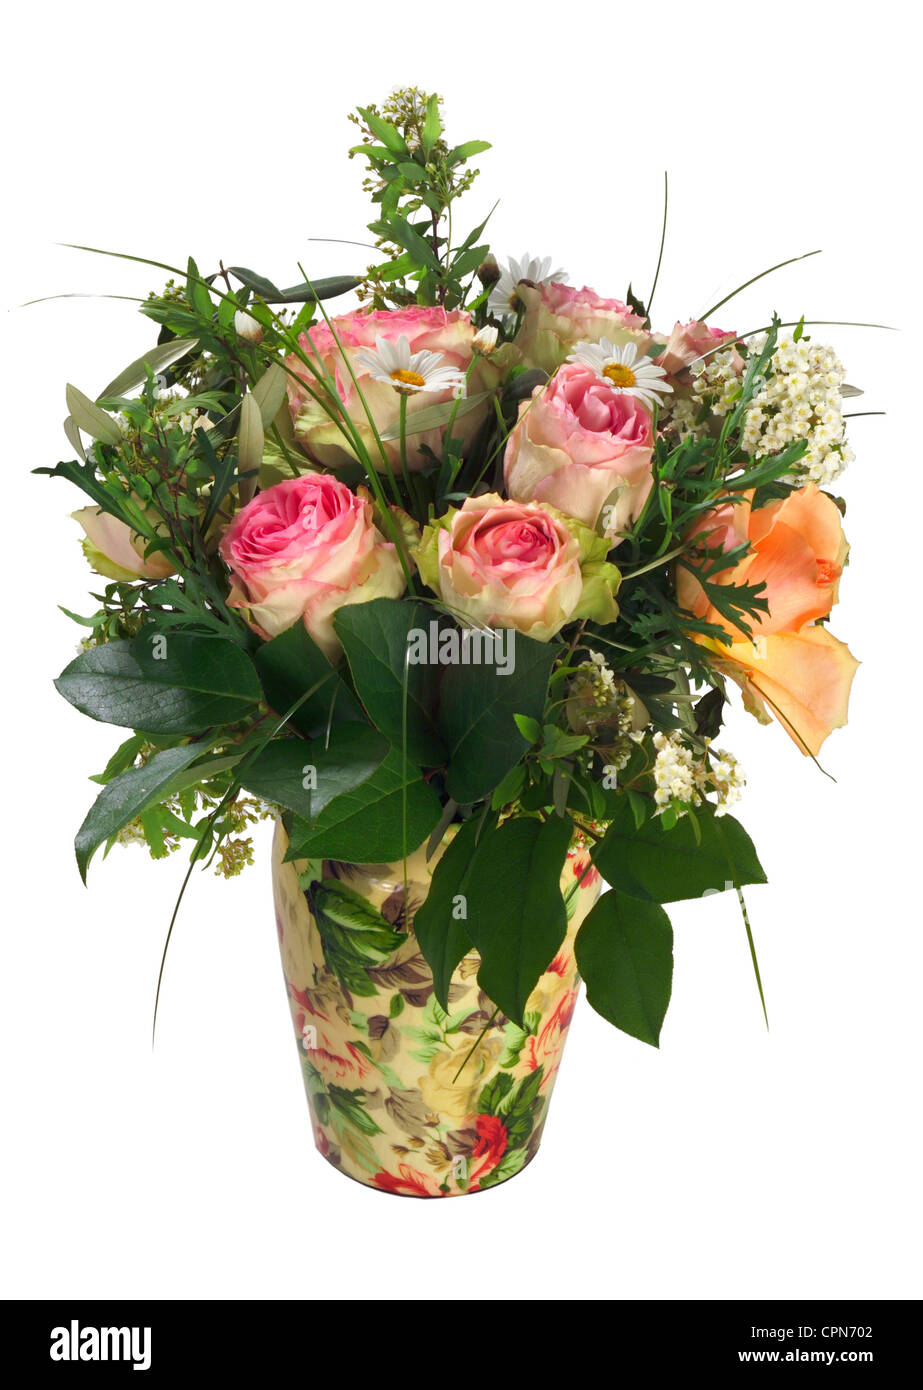 kitsch/cards/souvenir, bouquet of roses in a vase, roses came from Ecuador,  Germany, rose, roses, flower bouquet, bunch of flowers, bouquets, flower  vase, flower vases, vase, vases, flower, cut flowers, floral decoration,  floral